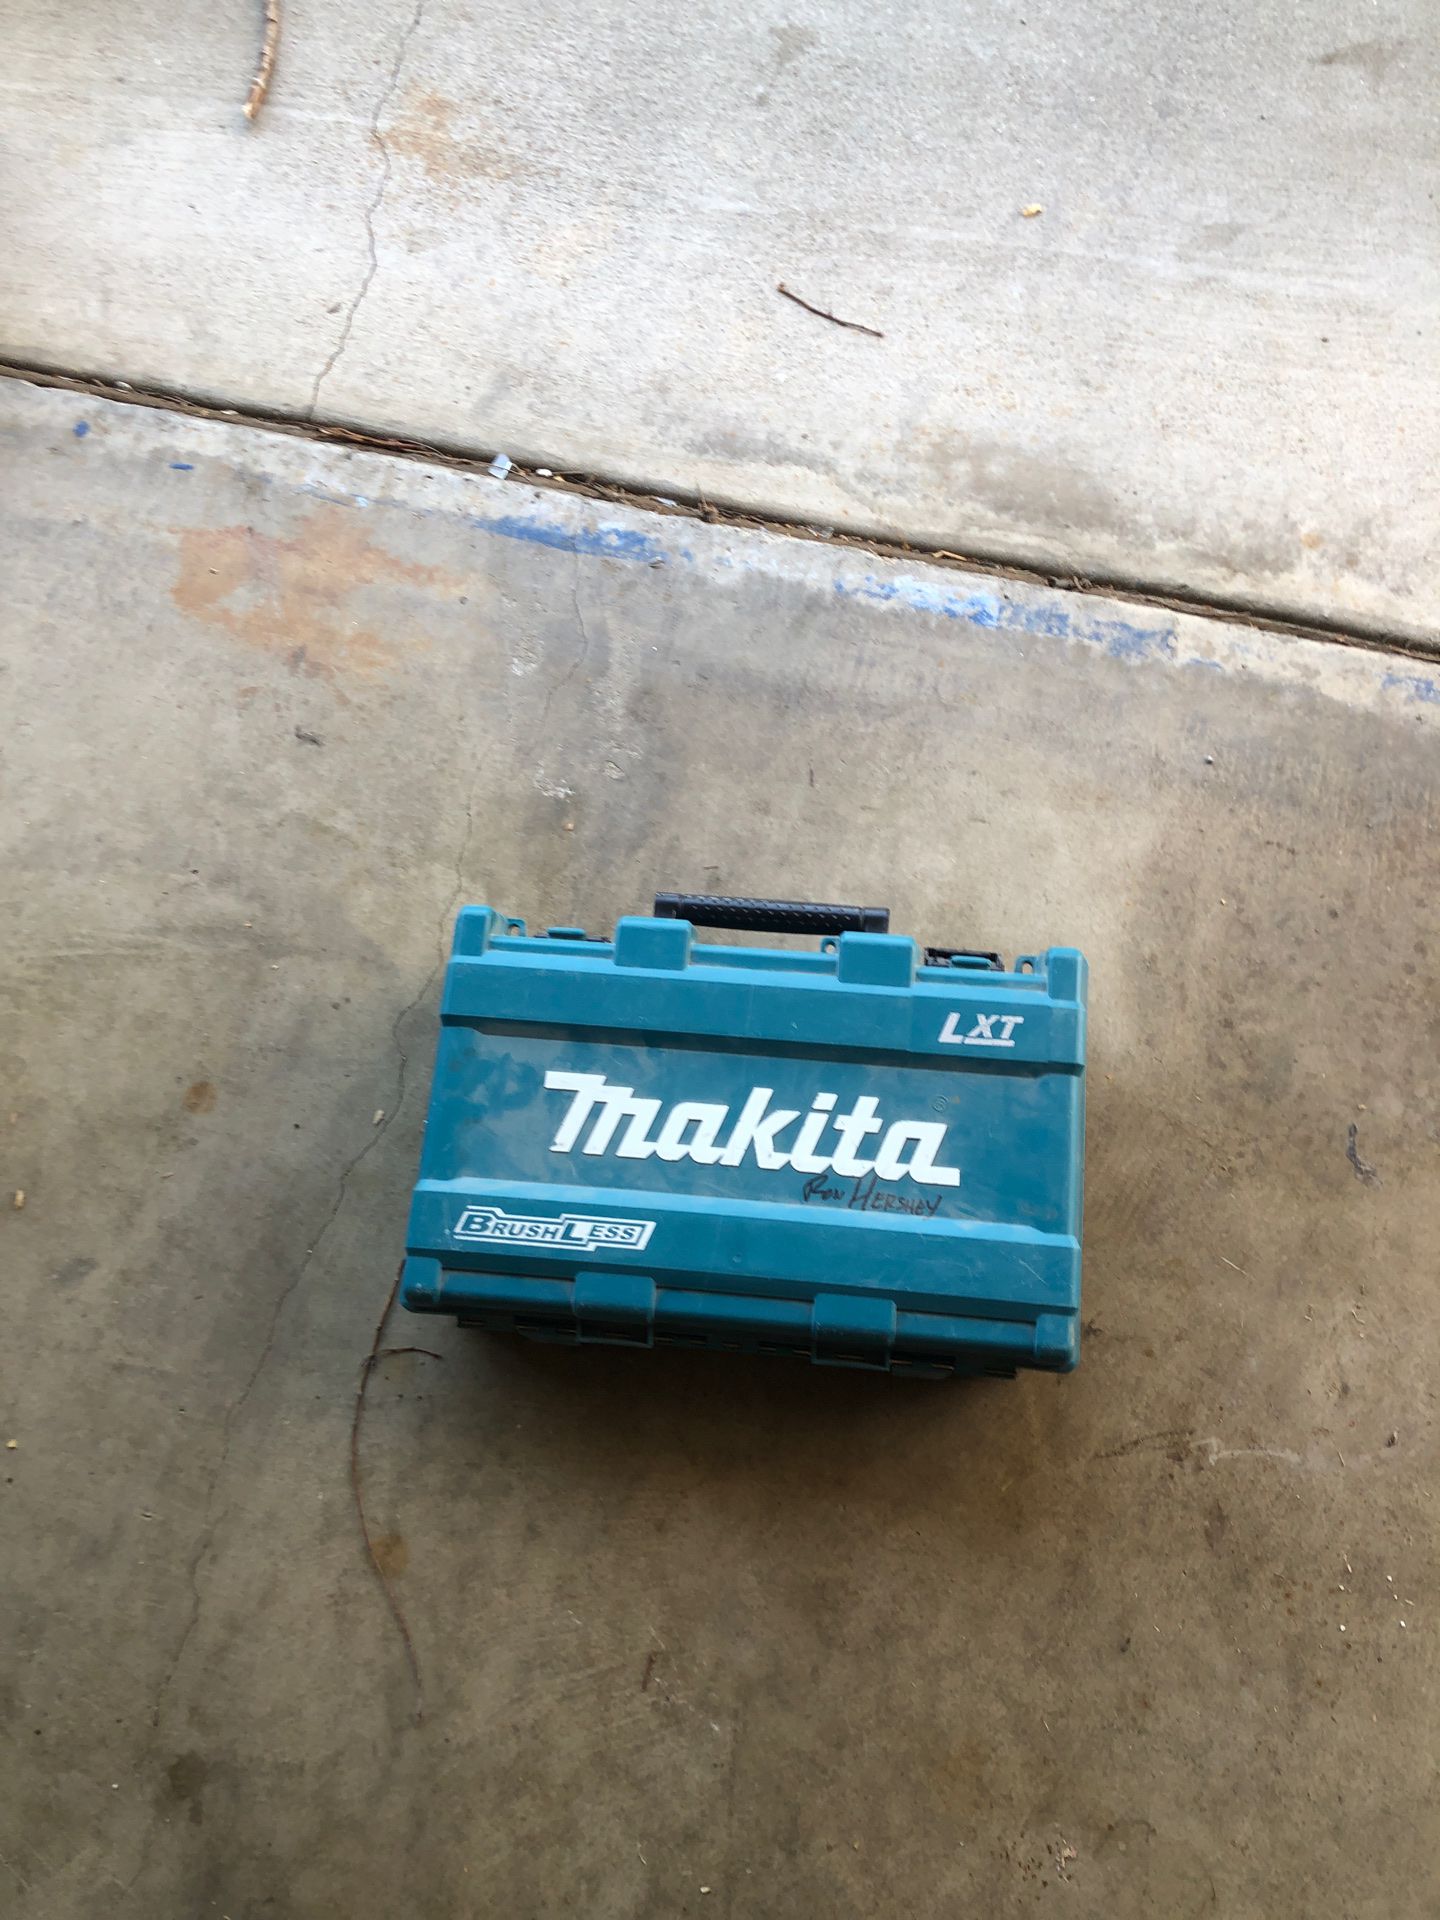 Makita impact and drill motor carrying case